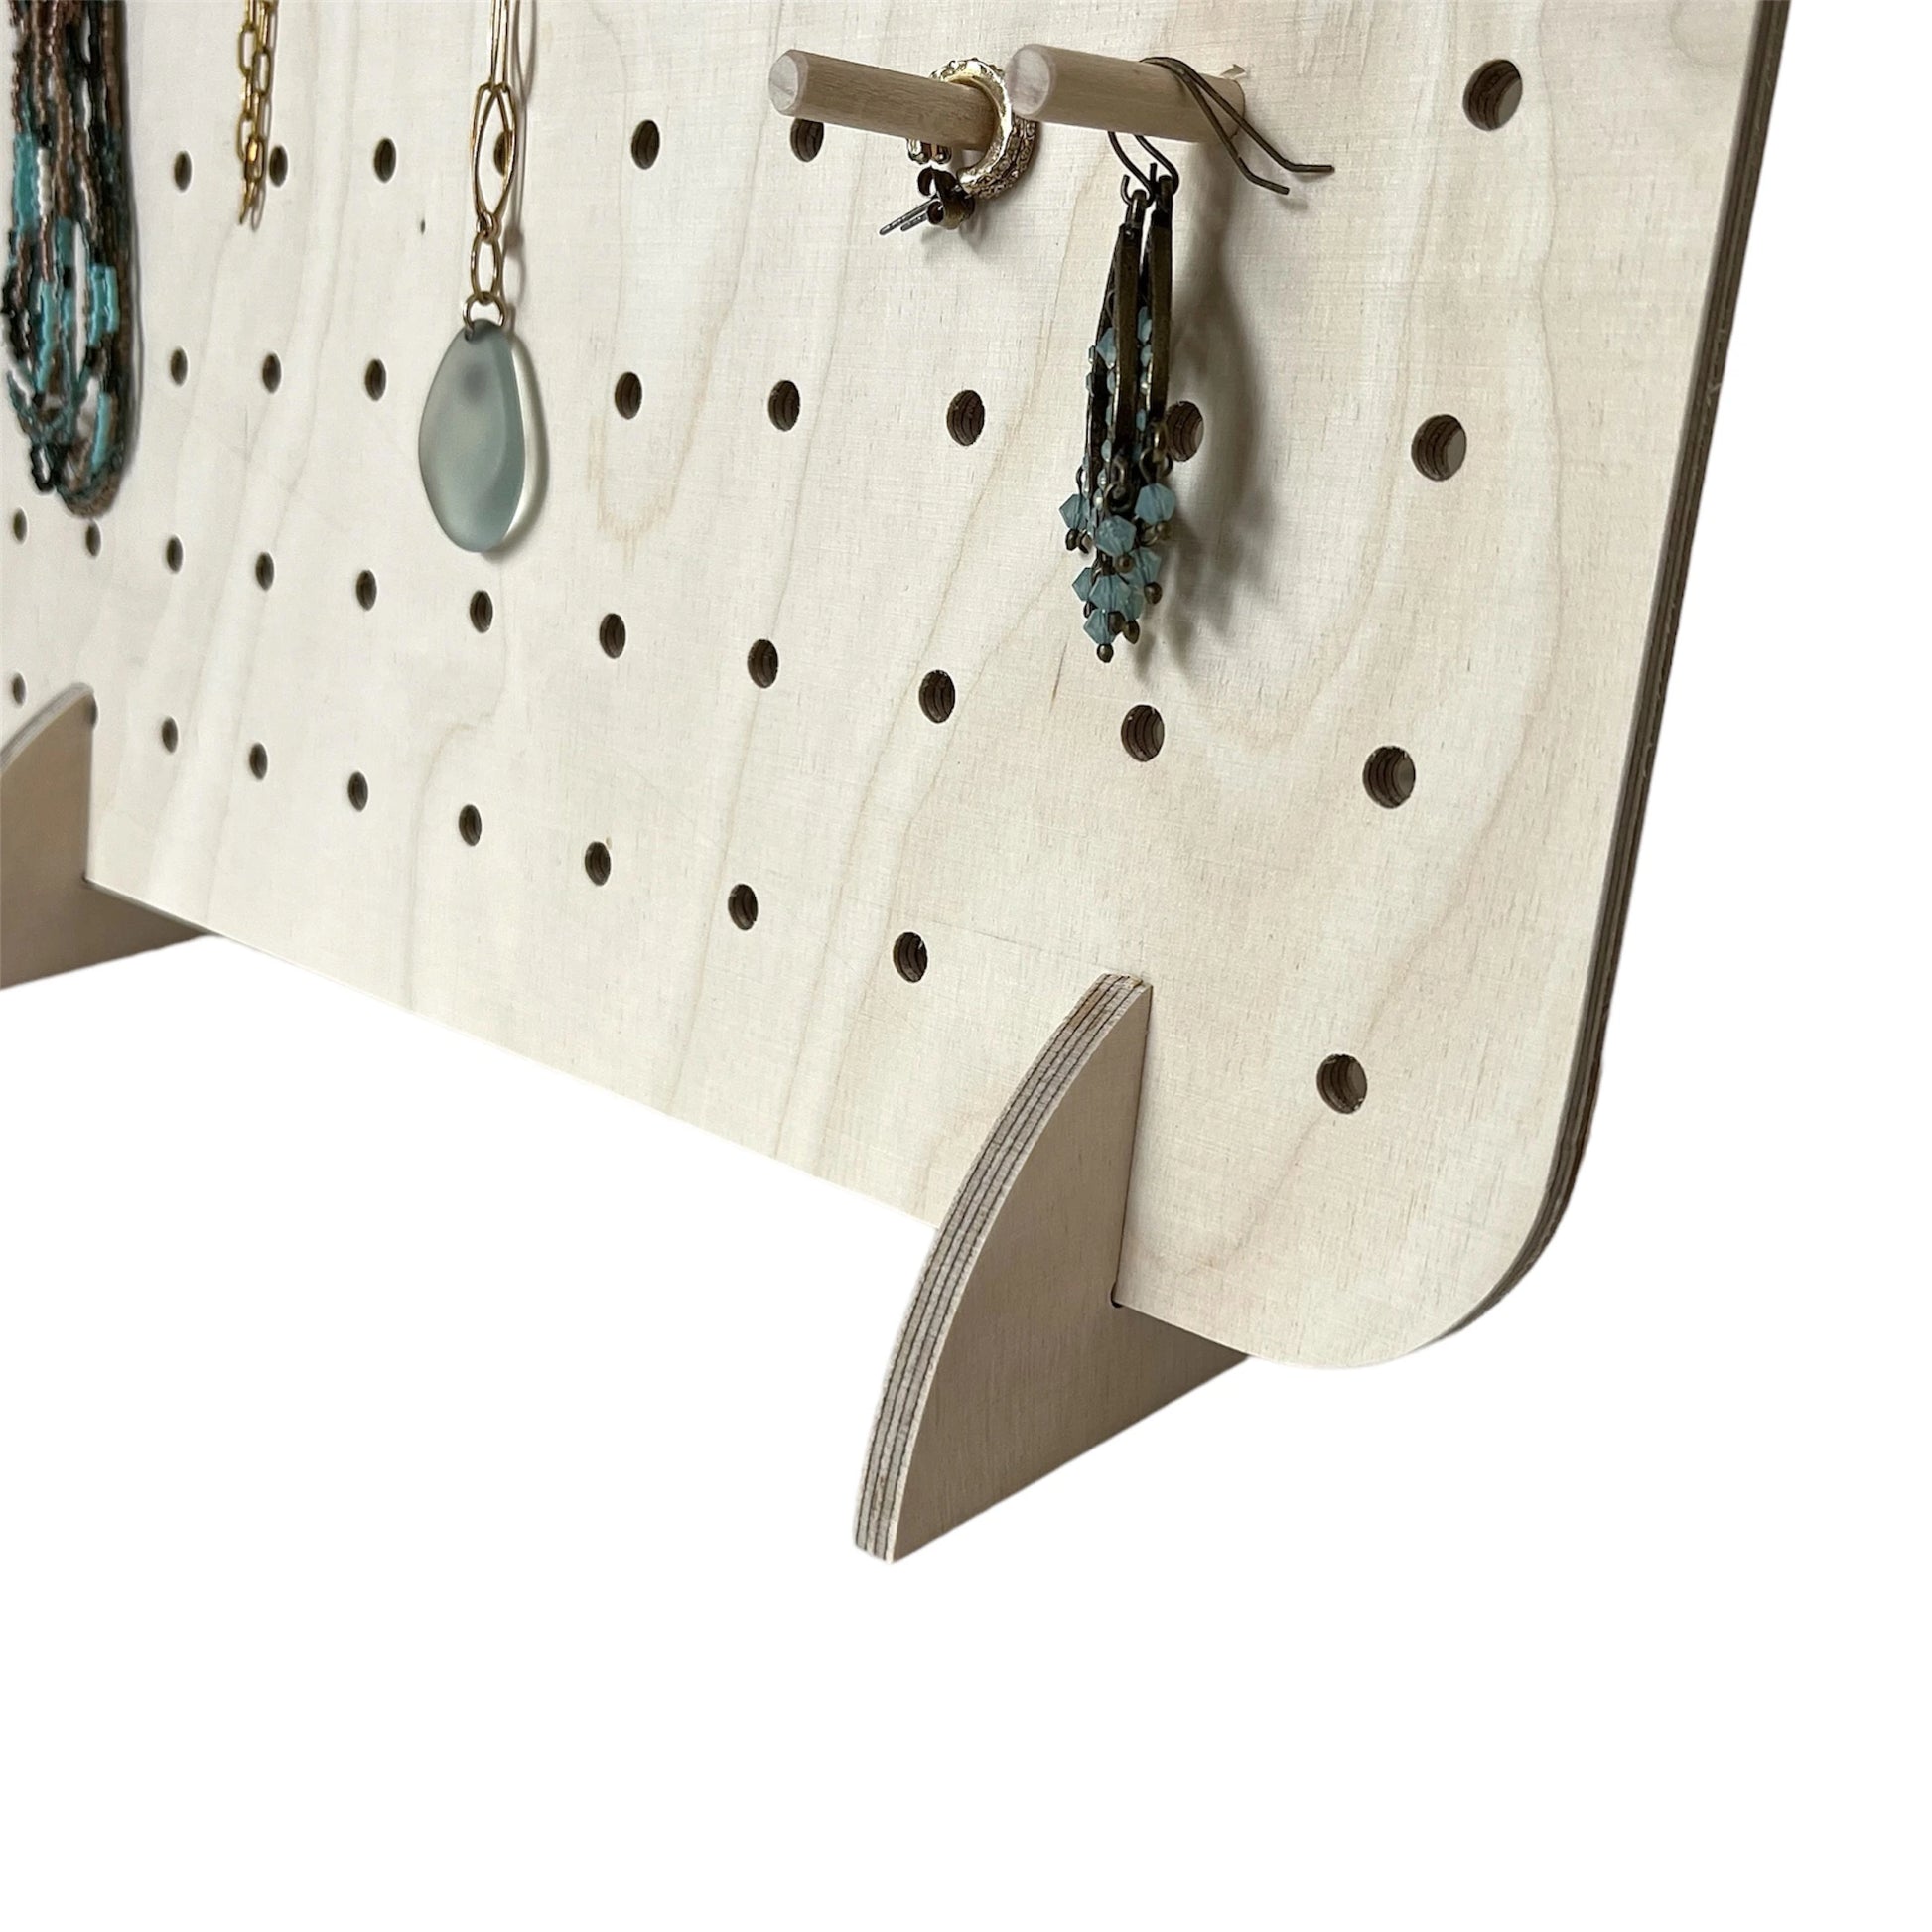 Close up of pale wooden pegboard facing to left.  Pegboard has jewellery hanging from the pegs.